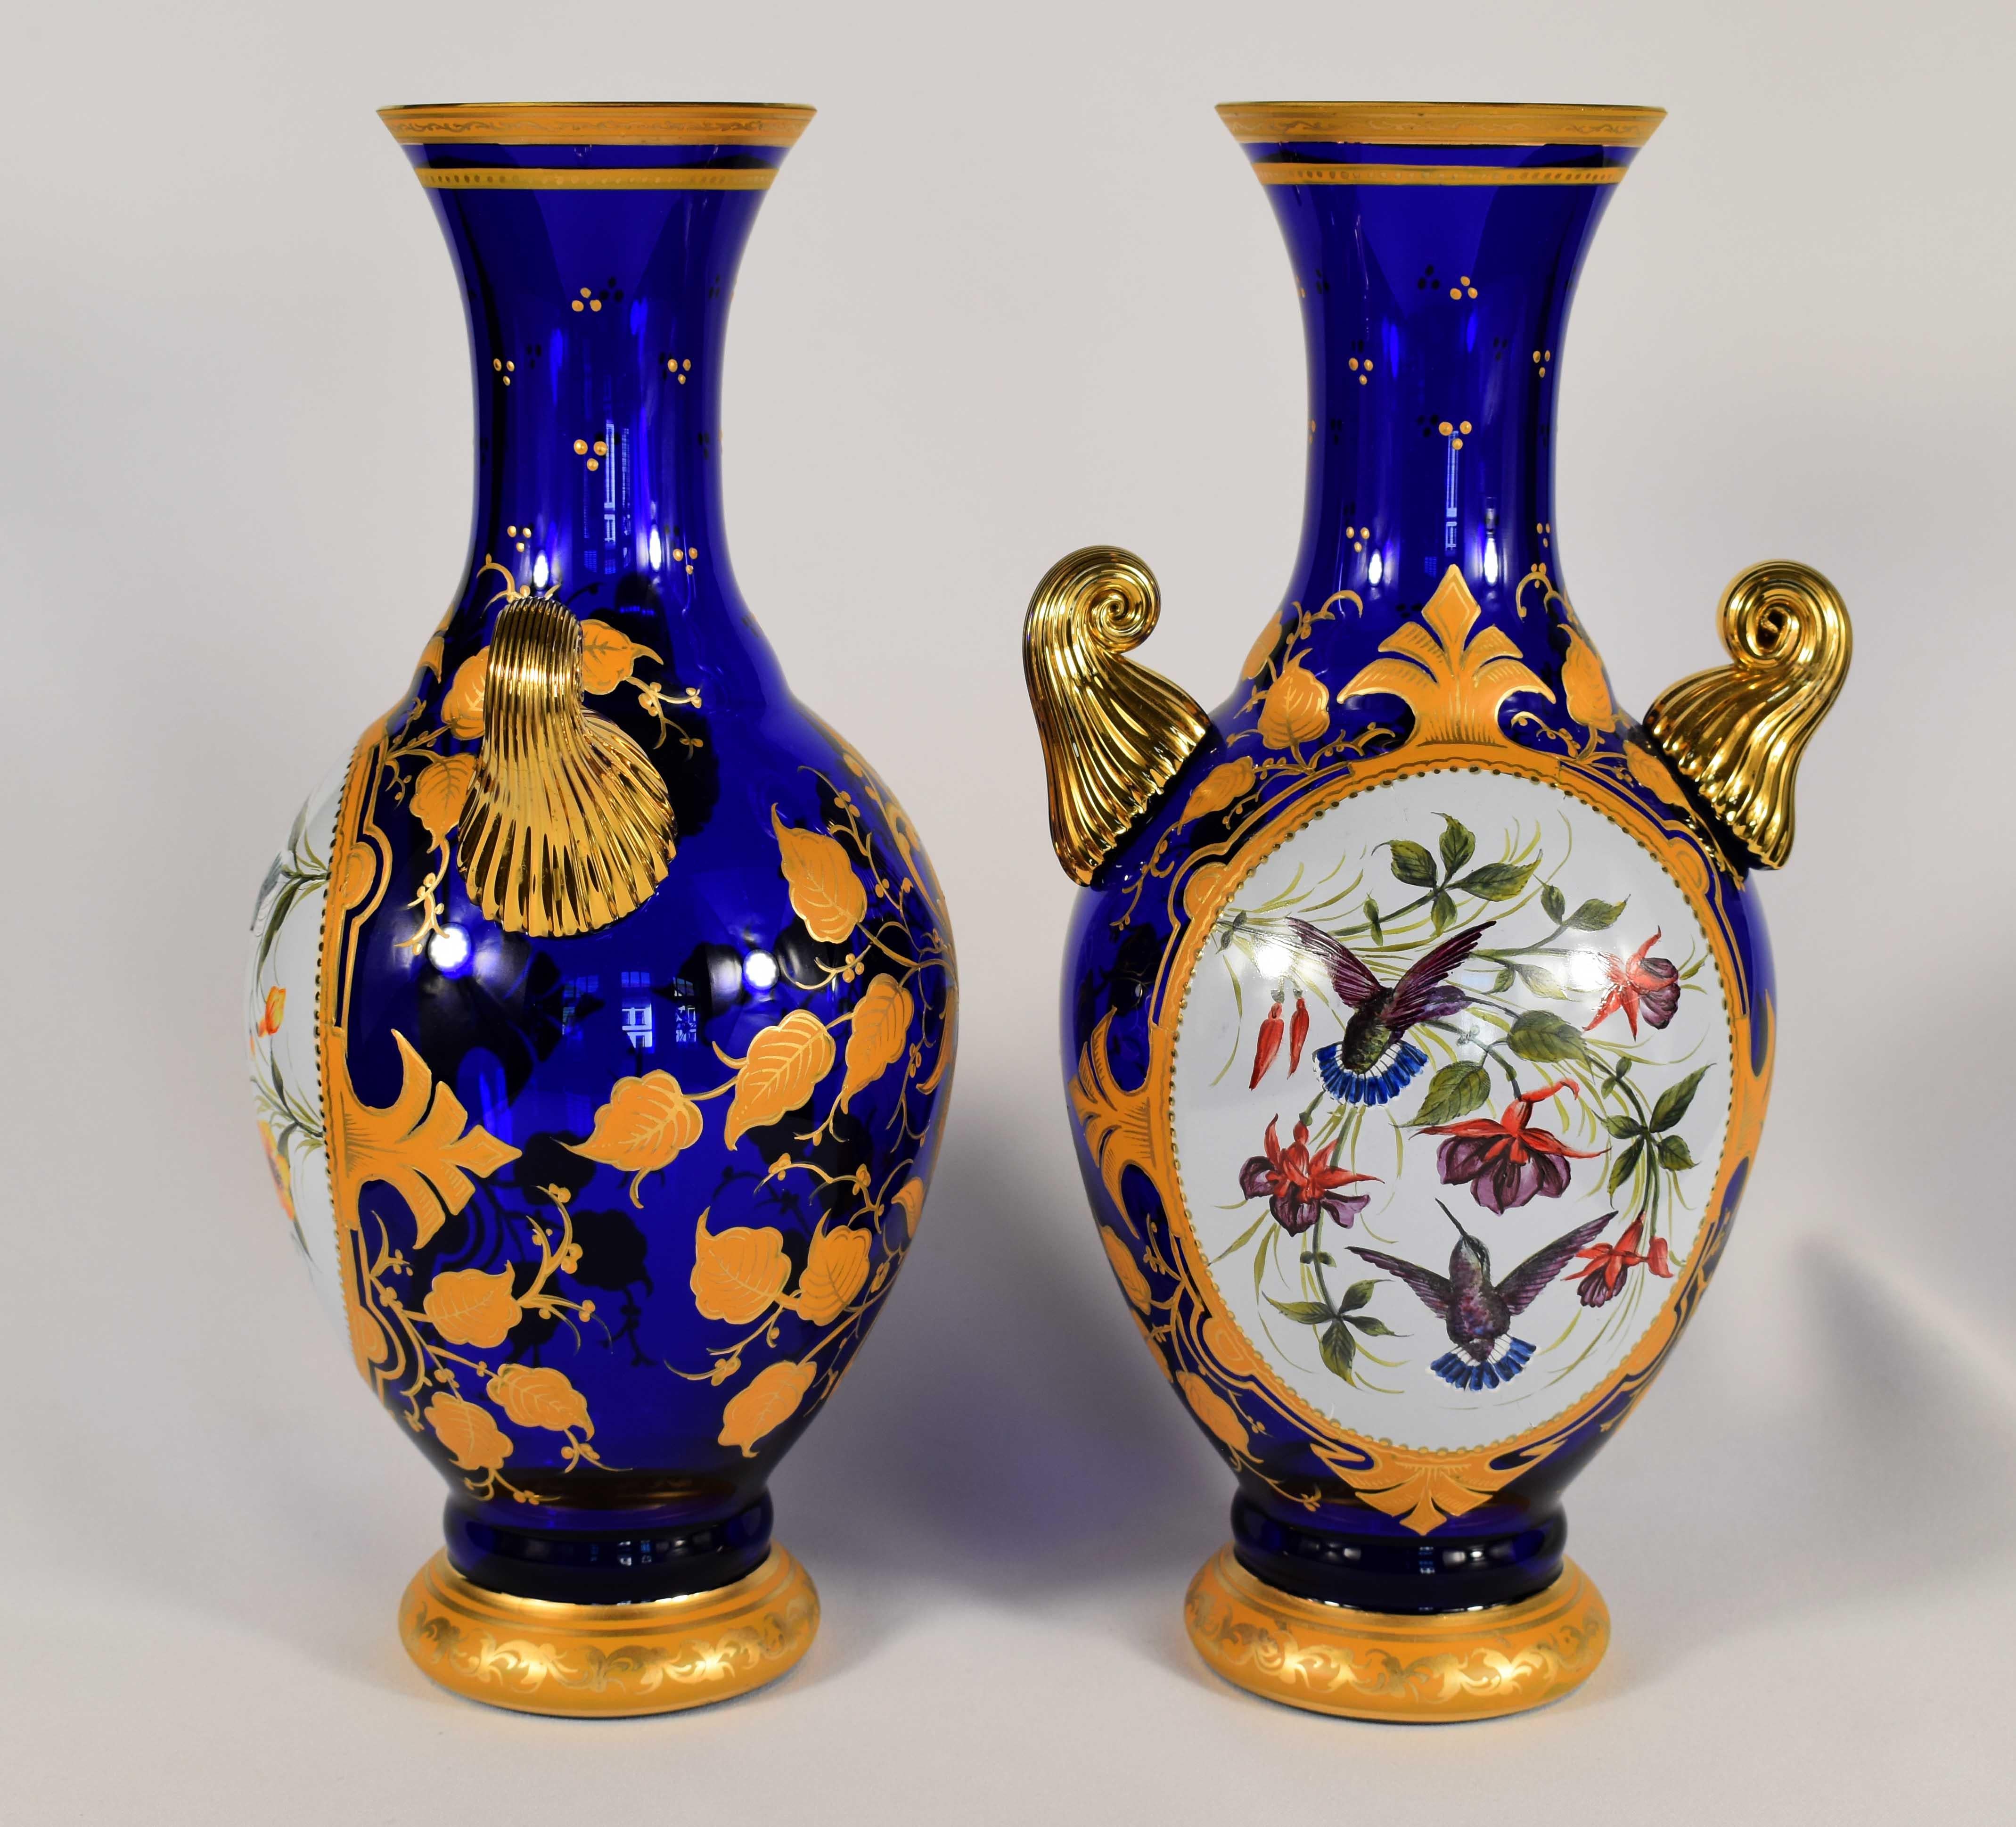 Hand-Crafted Pair of Blue Hand-Painted and Gilded Vases, Bohemian Glass 20h Century For Sale